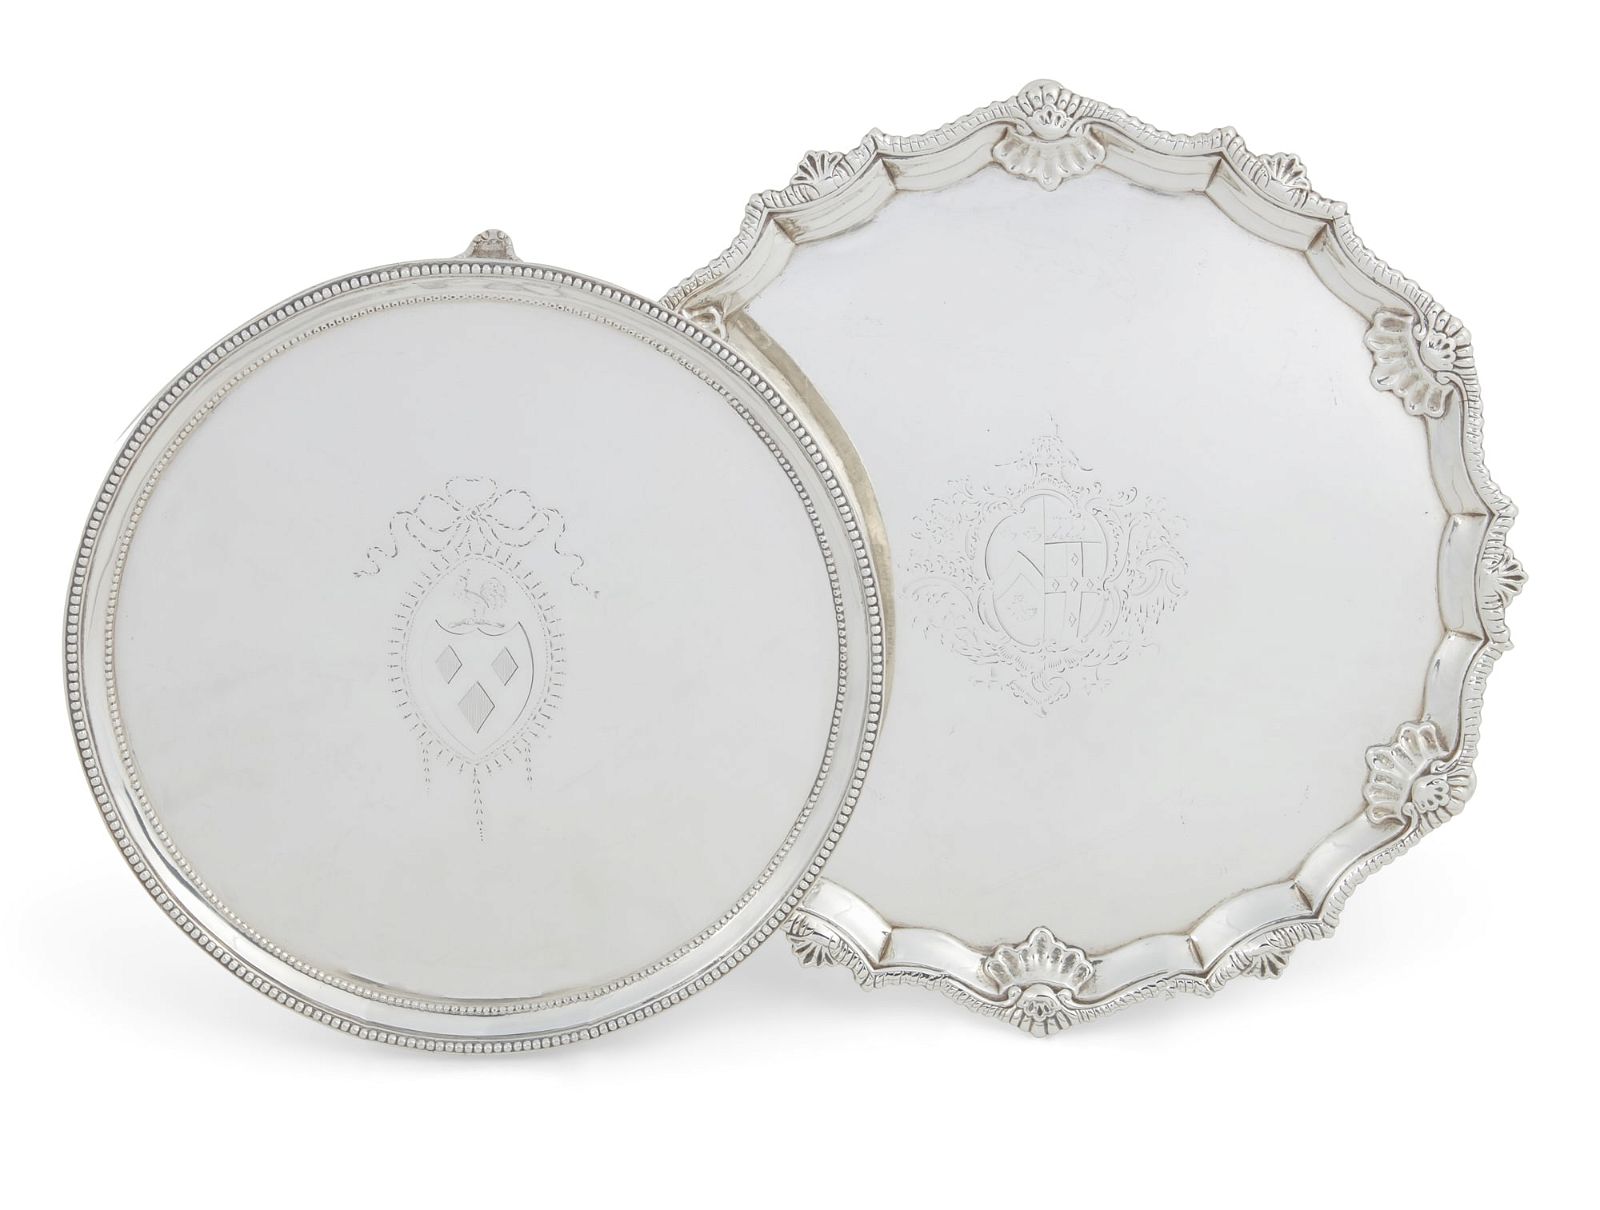 TWO GEORGE III STERLING SILVER